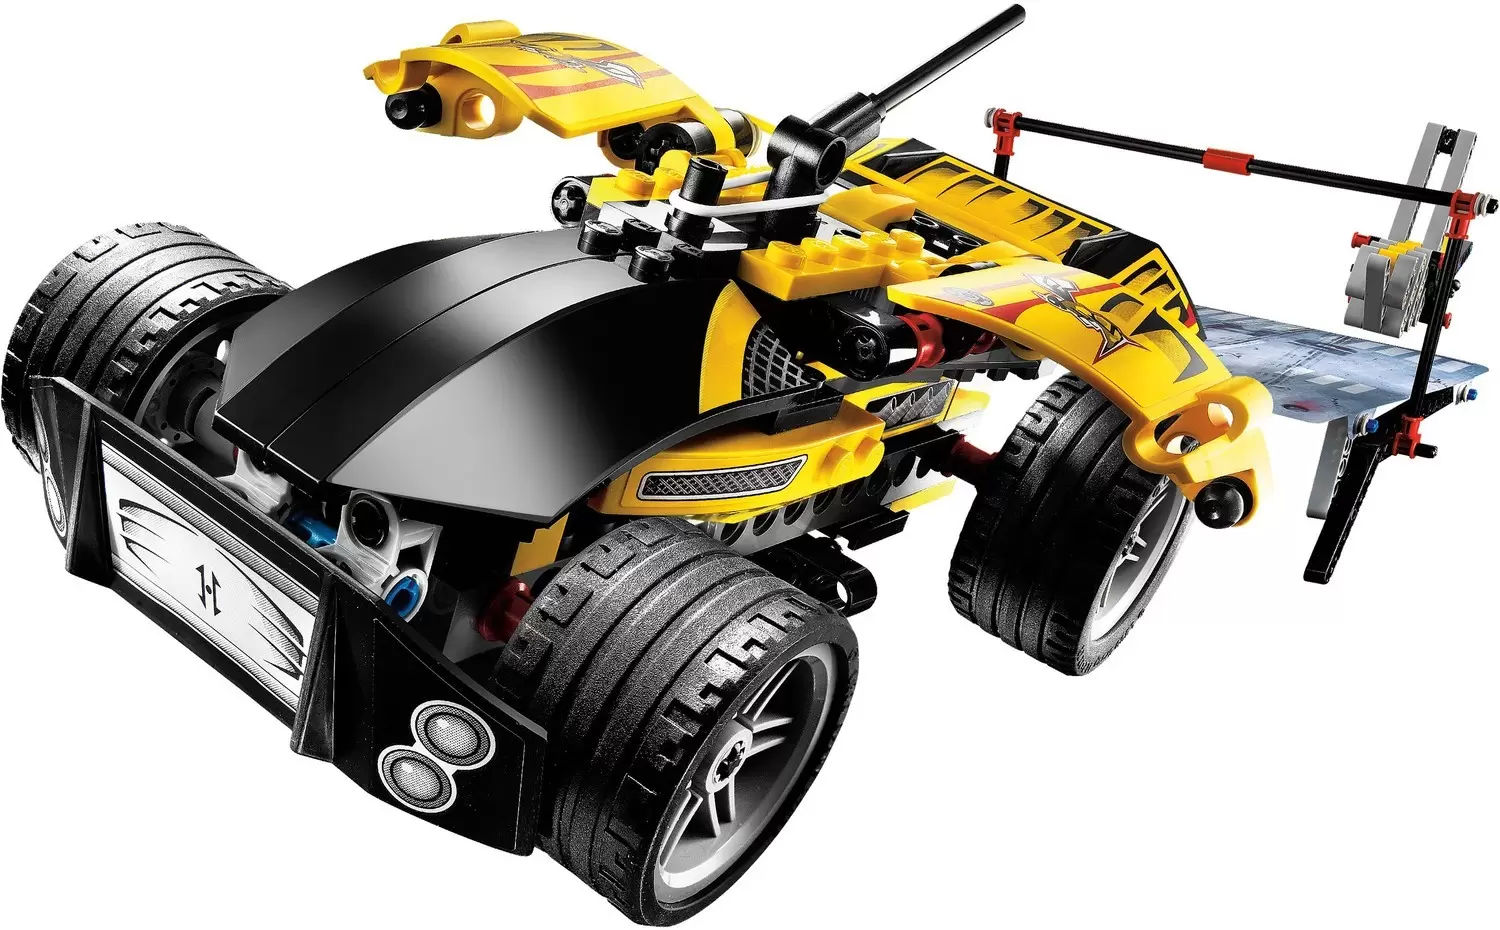 LEGO Racers - Wing Jumper